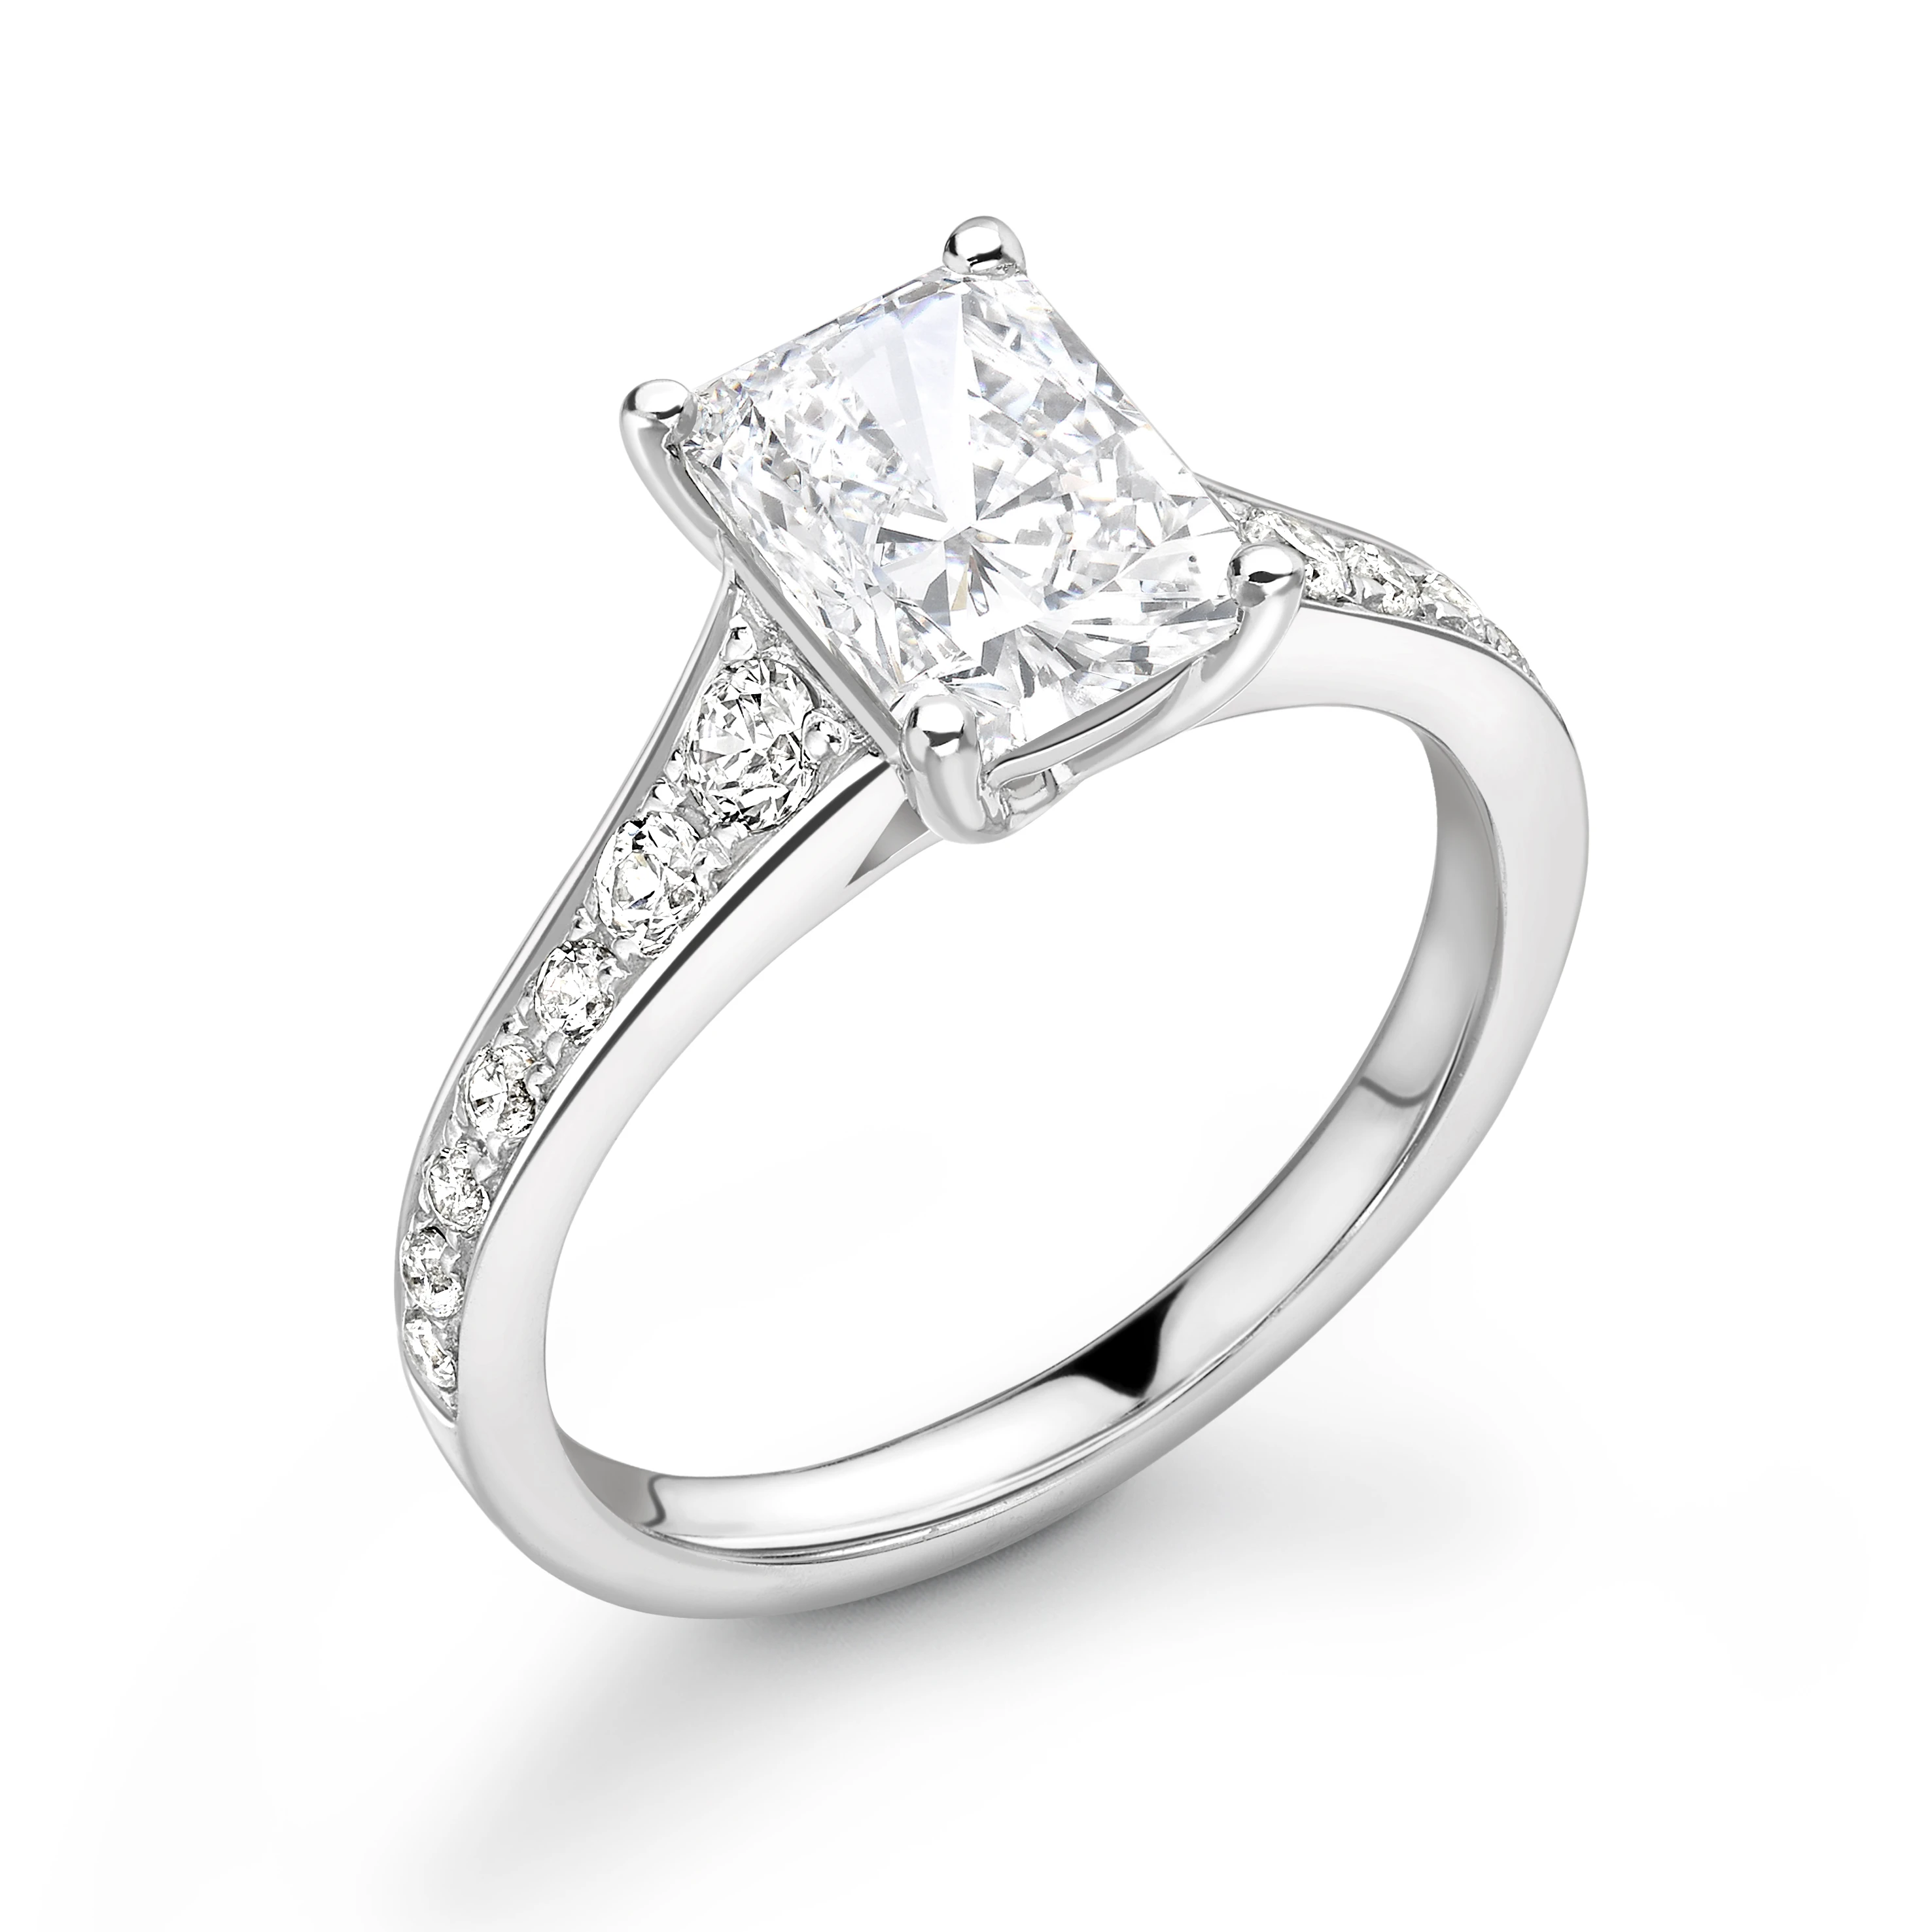 Tapering Up Shoulder Radiant Diamond Engagement Ring in Gold and Platinum